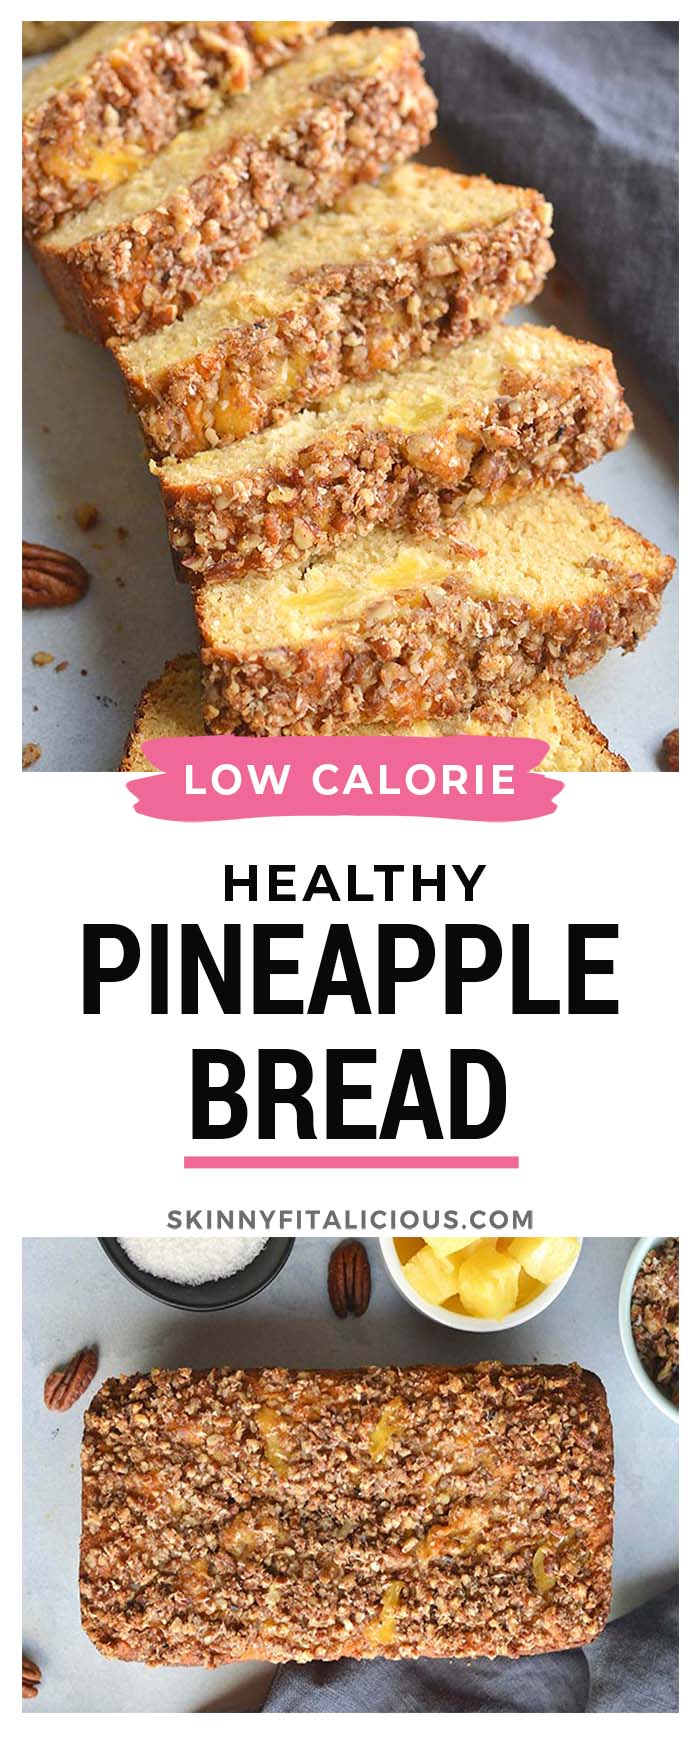 Healthy Coconut Pineapple Bread is a simple, wholesome Paleo breakfast or dessert. Pineapple chunks nestled in warm, baked bread with a sweet pecan topping.